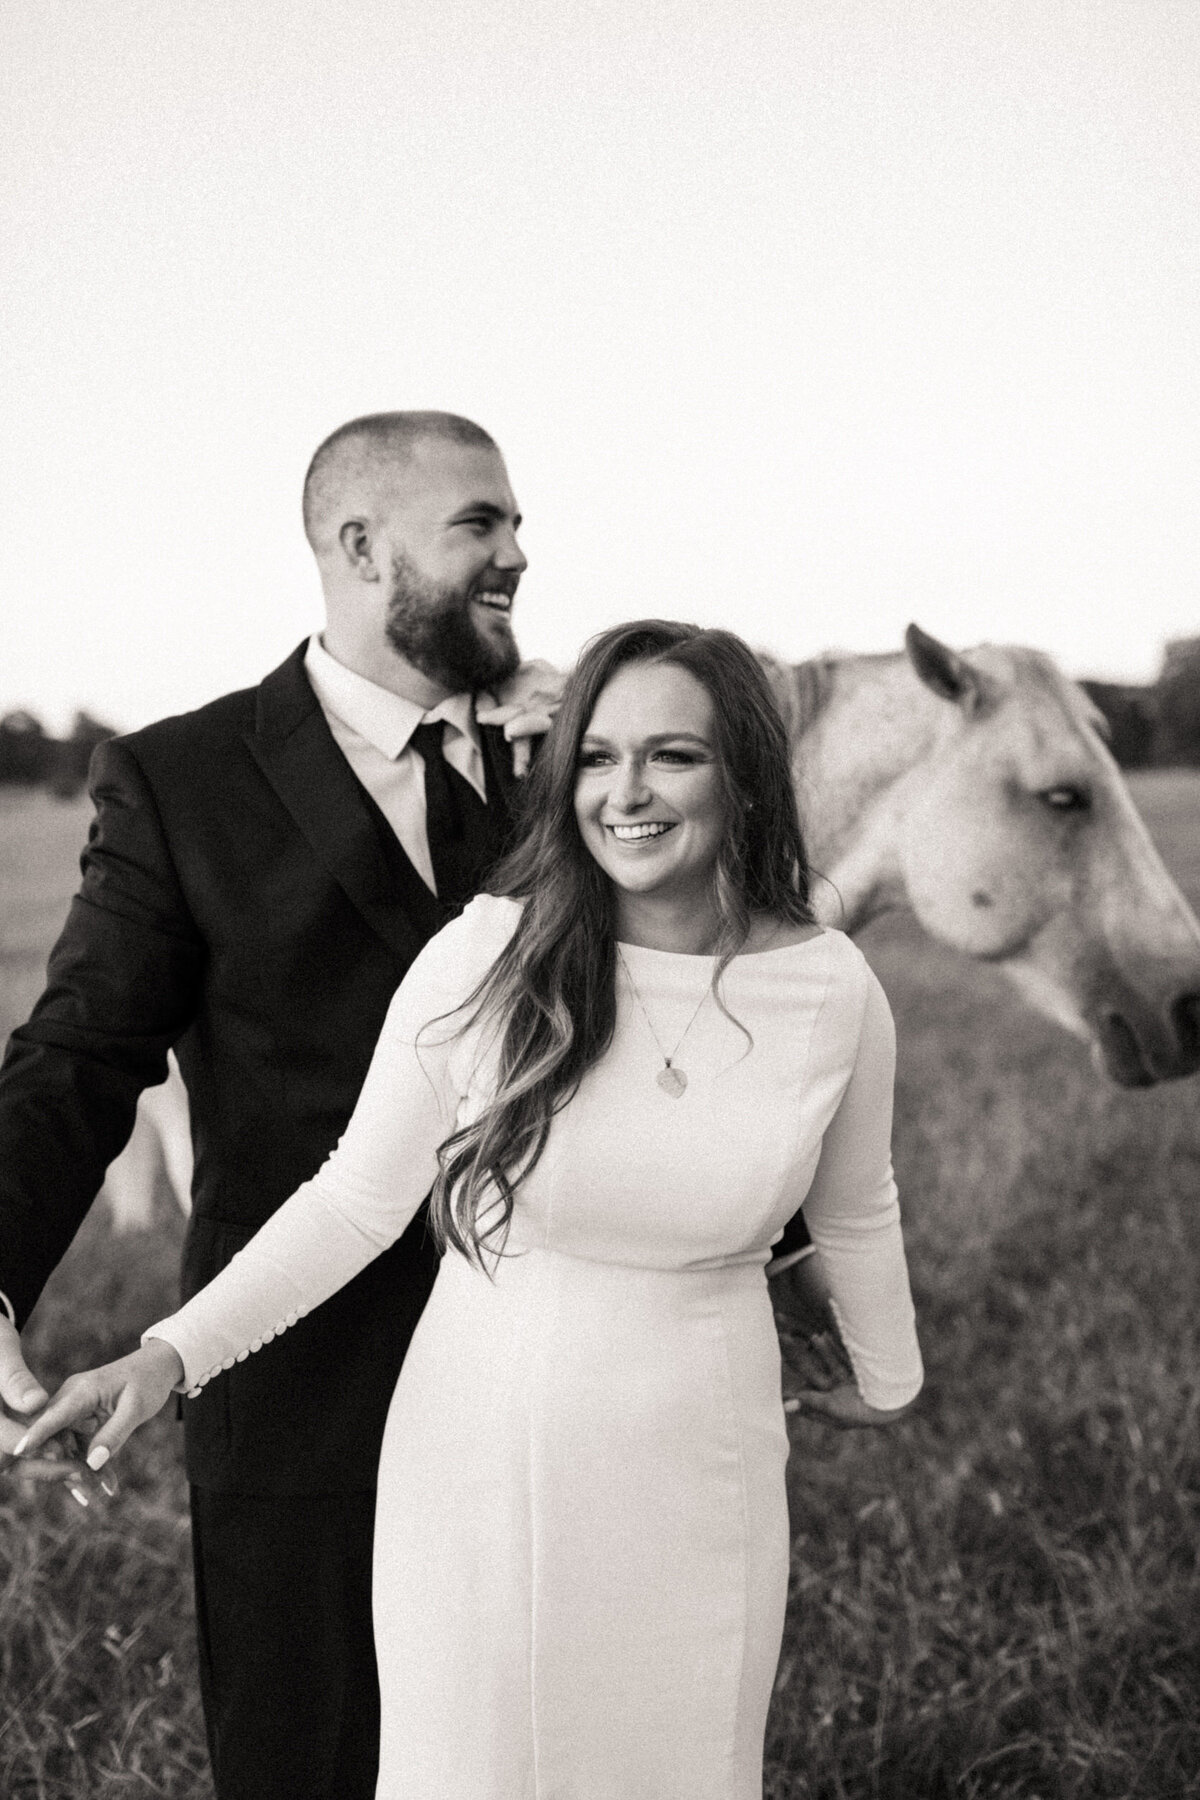 Bride and groom laughing in a field with a horse behind them